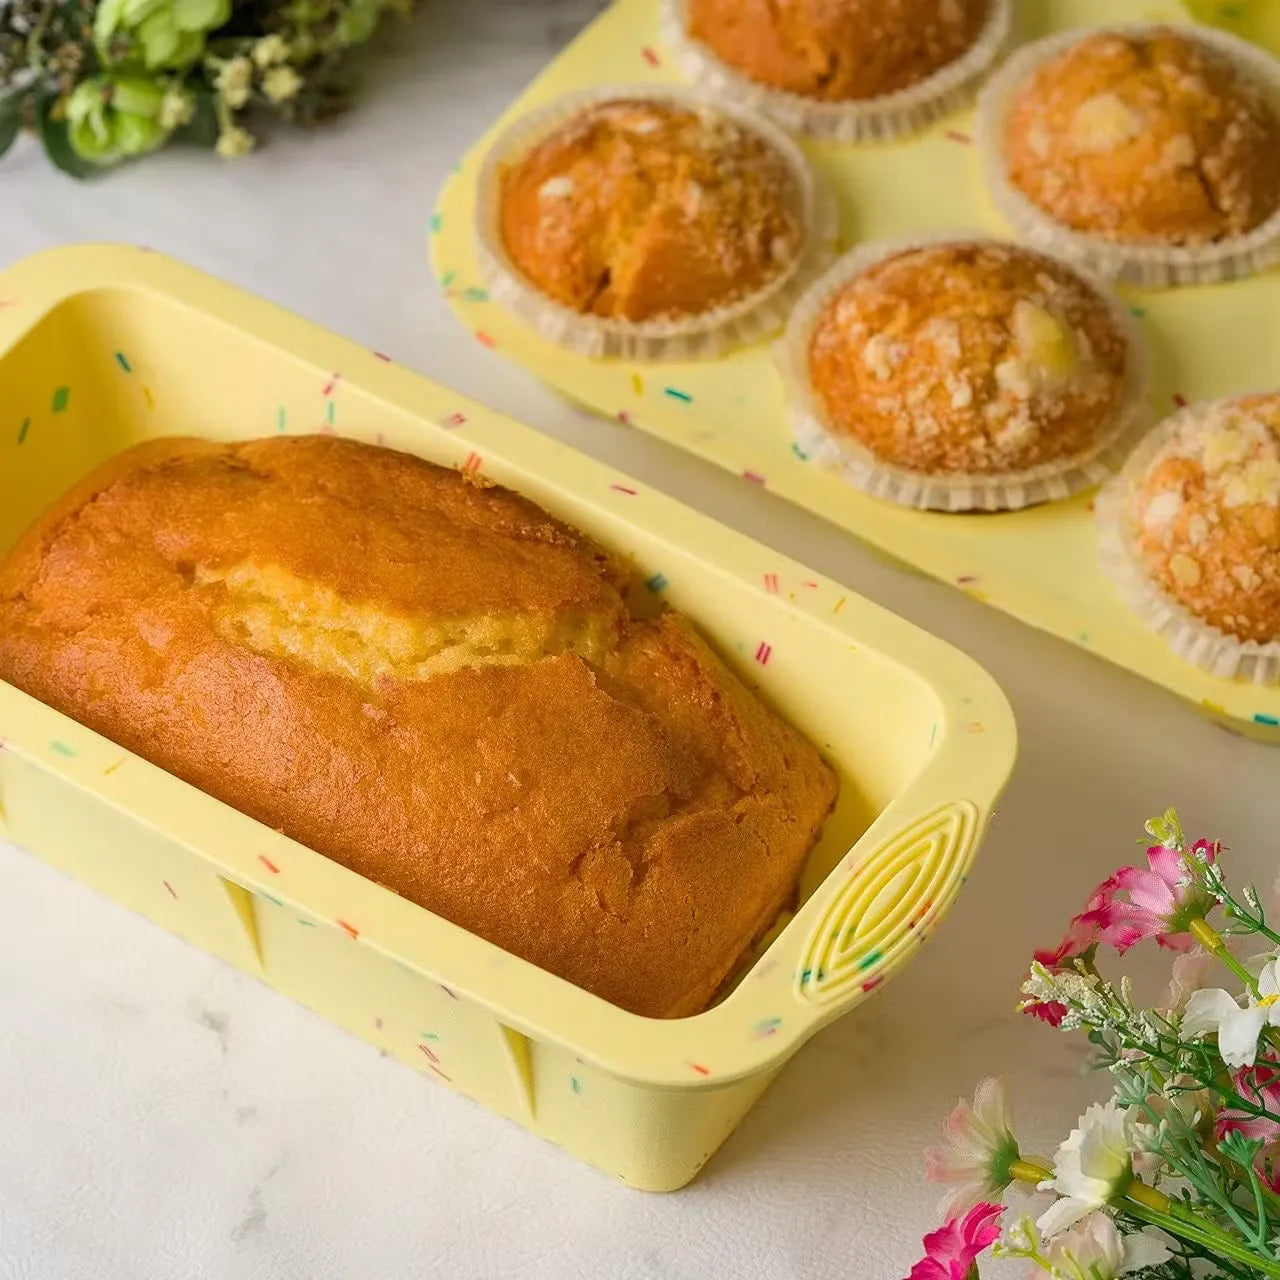 Insiya 2-in-1 baking pan made from material with number muffin cups and a rectangular baking area. Bake sweet and savory treats with ease using the Insiya 2-in-1 pan! Muffin cups and baking tray combined for space-saving convenience